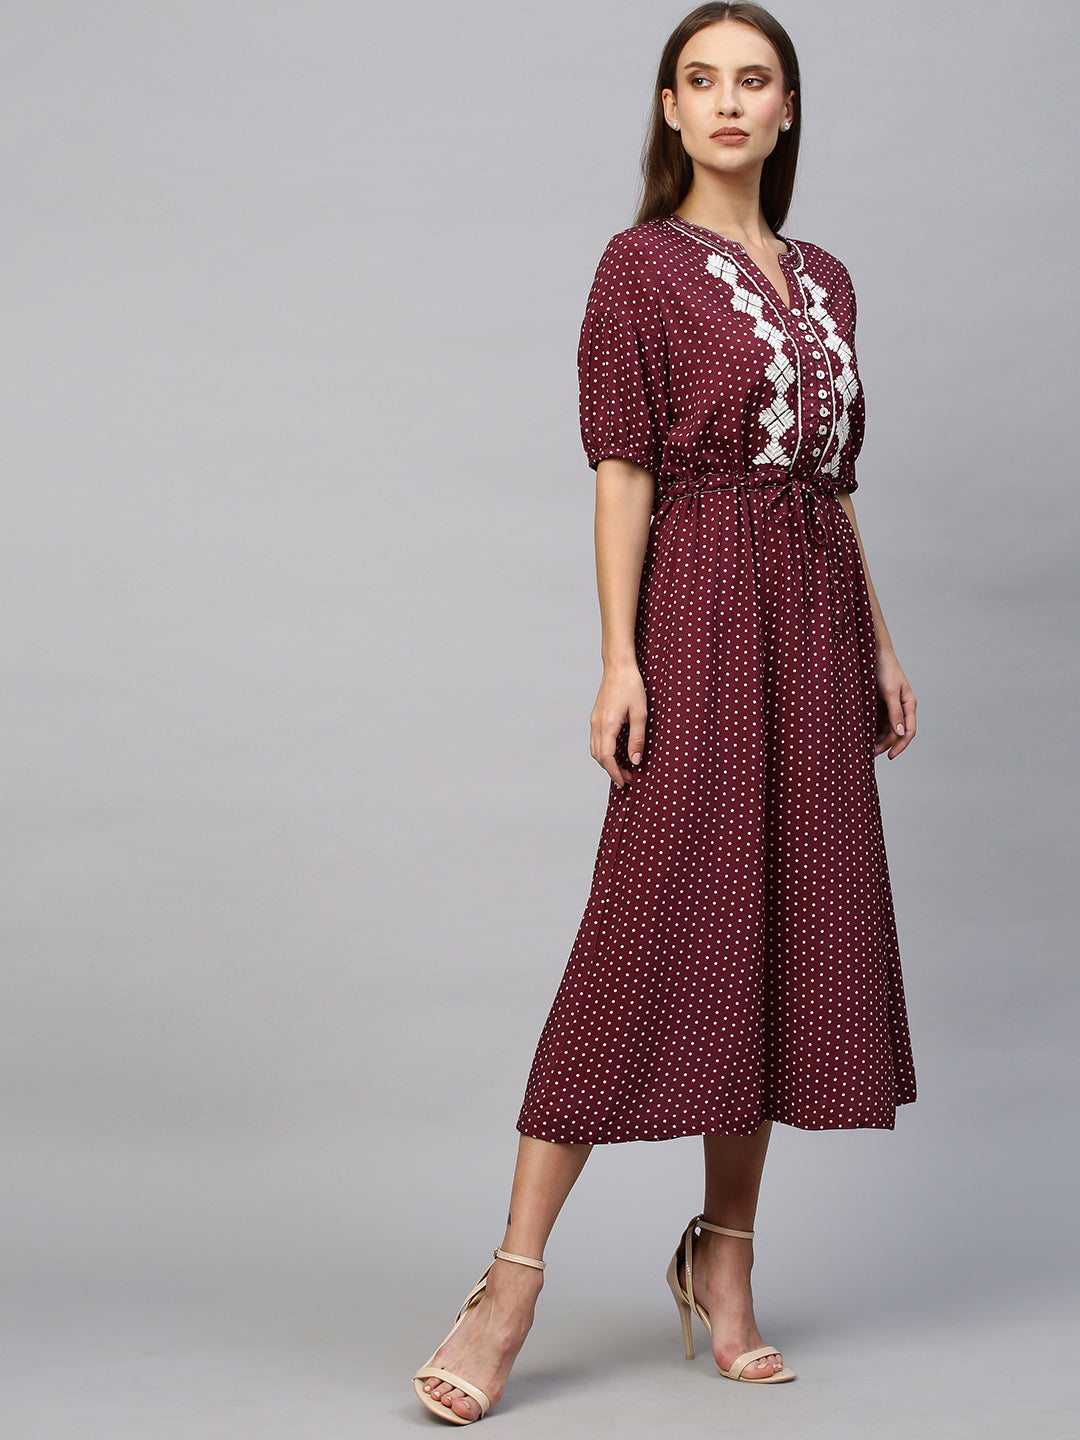 Printed Rayon, Embroidered Synched Waist Flared Shirt Dress